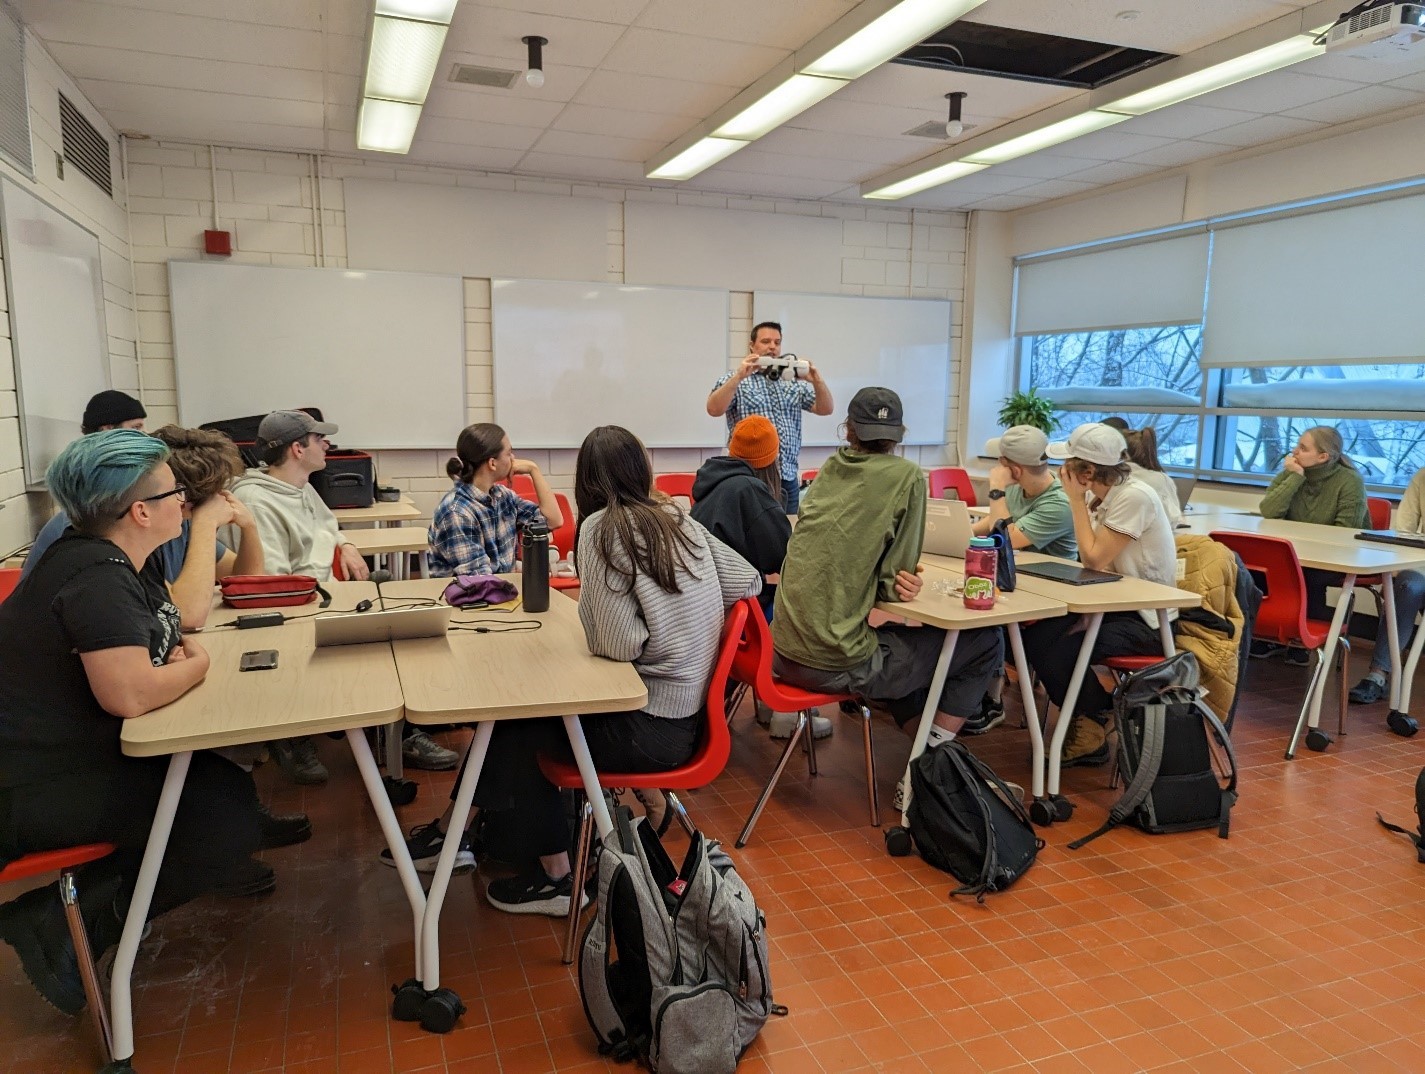 Photo of a classroom with whiteboards covering the left and back walls, and windows on the right wall. Students are seated around 3 islands of 5 or 6 individuals. In the back of the room, a male technician is holding up a virtual reality headset while talking to the students. It can be inferred that he is explaining to the students how to use the headset. Image source: Andy Van Drom